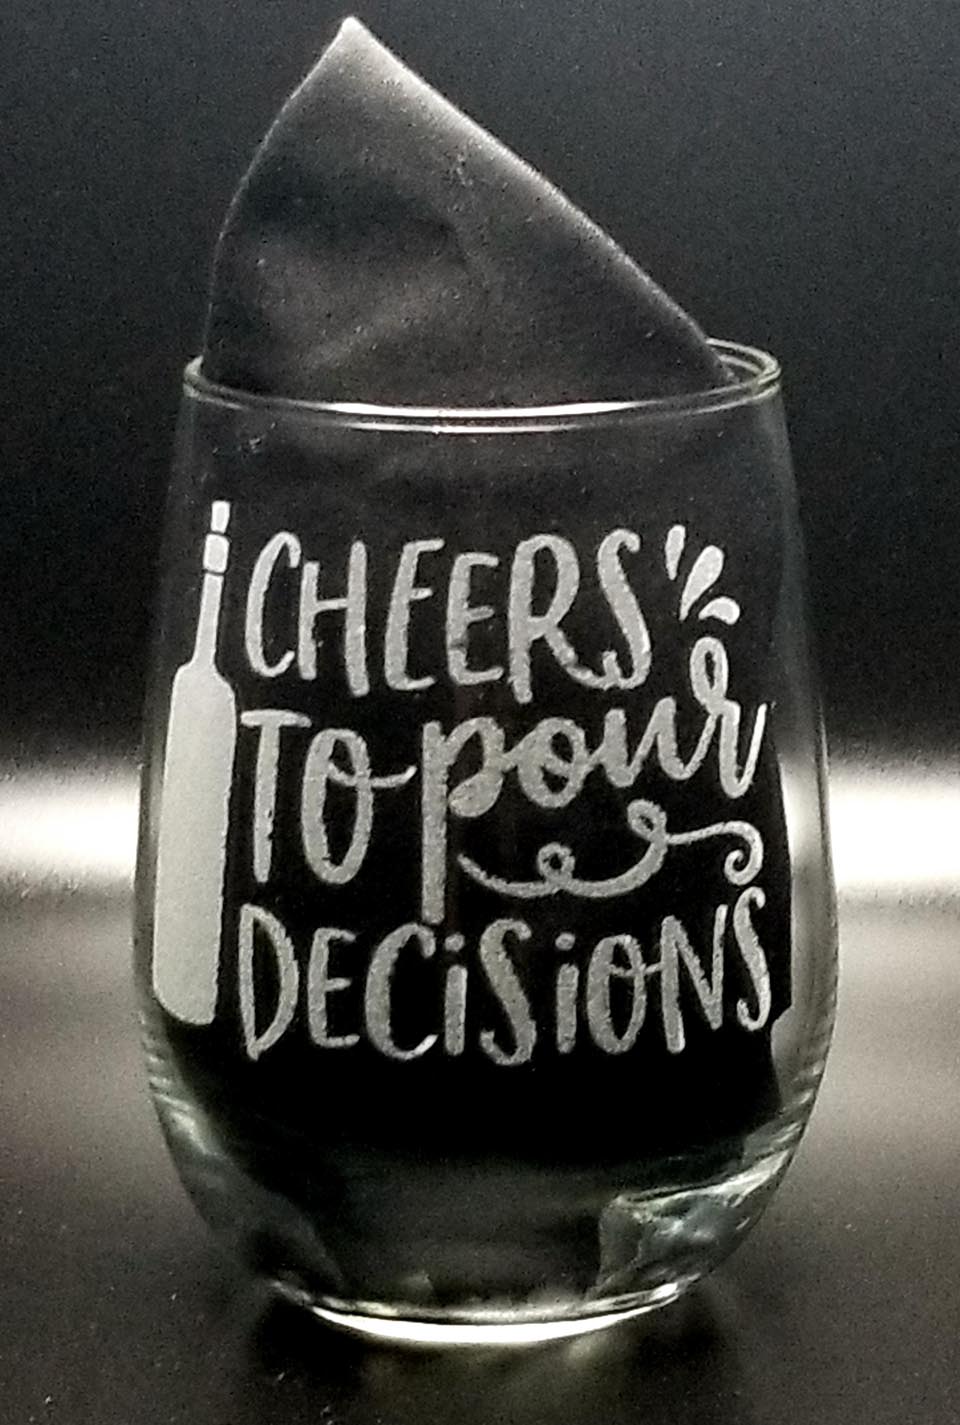 Cheers to Pour Decisions Photo